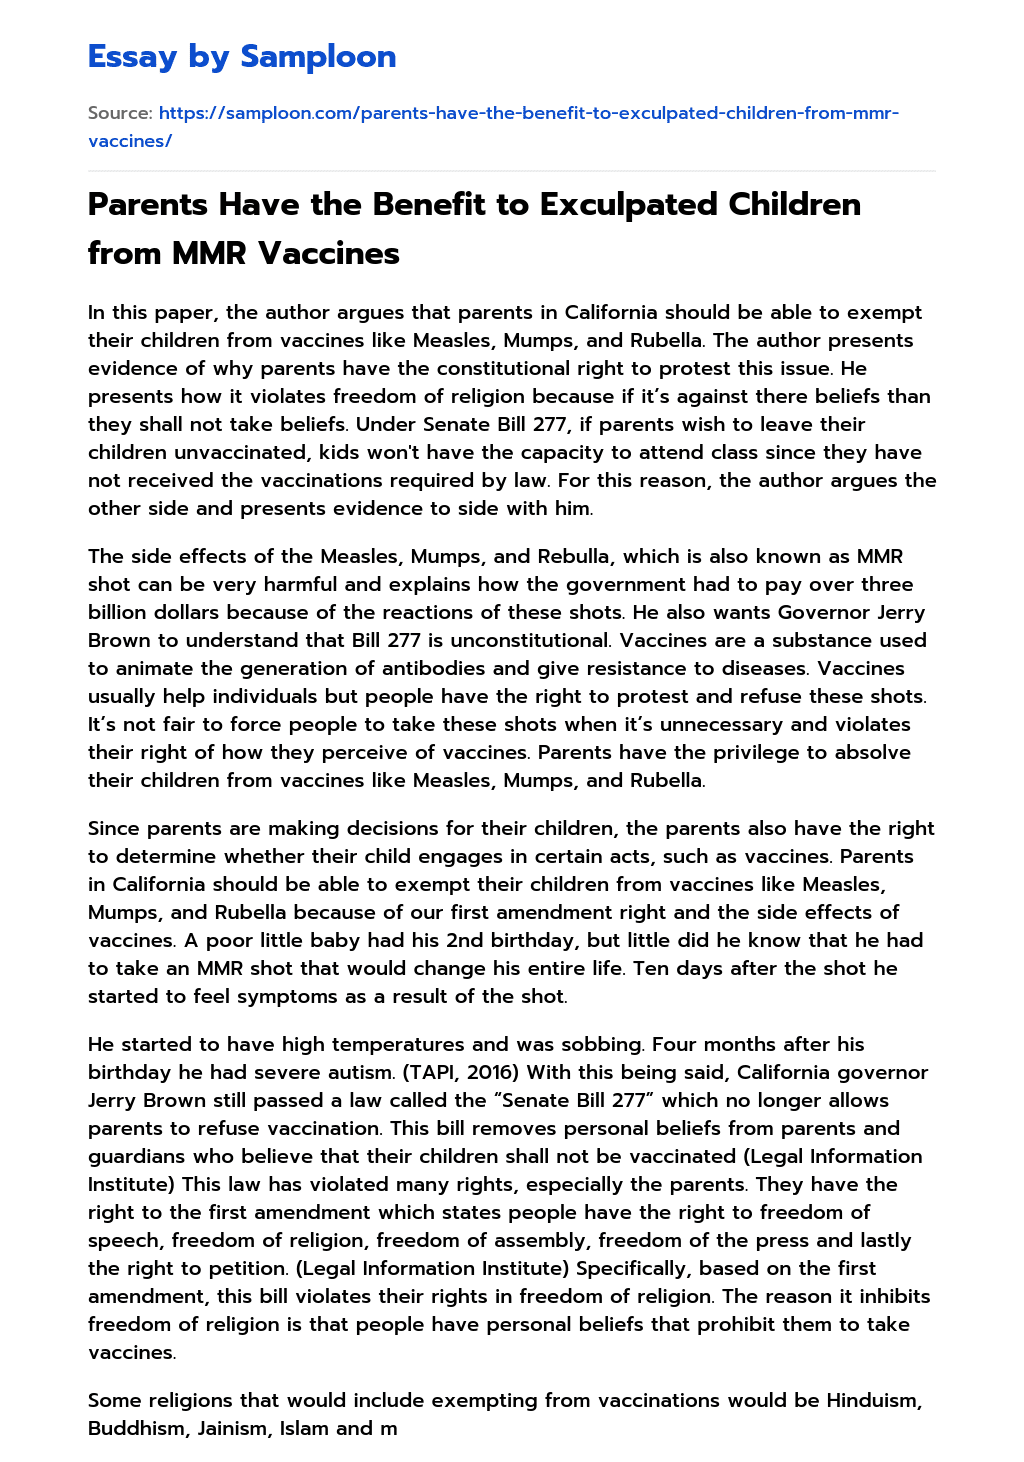 Parents Have the Benefit to Exculpated Children from MMR Vaccines essay